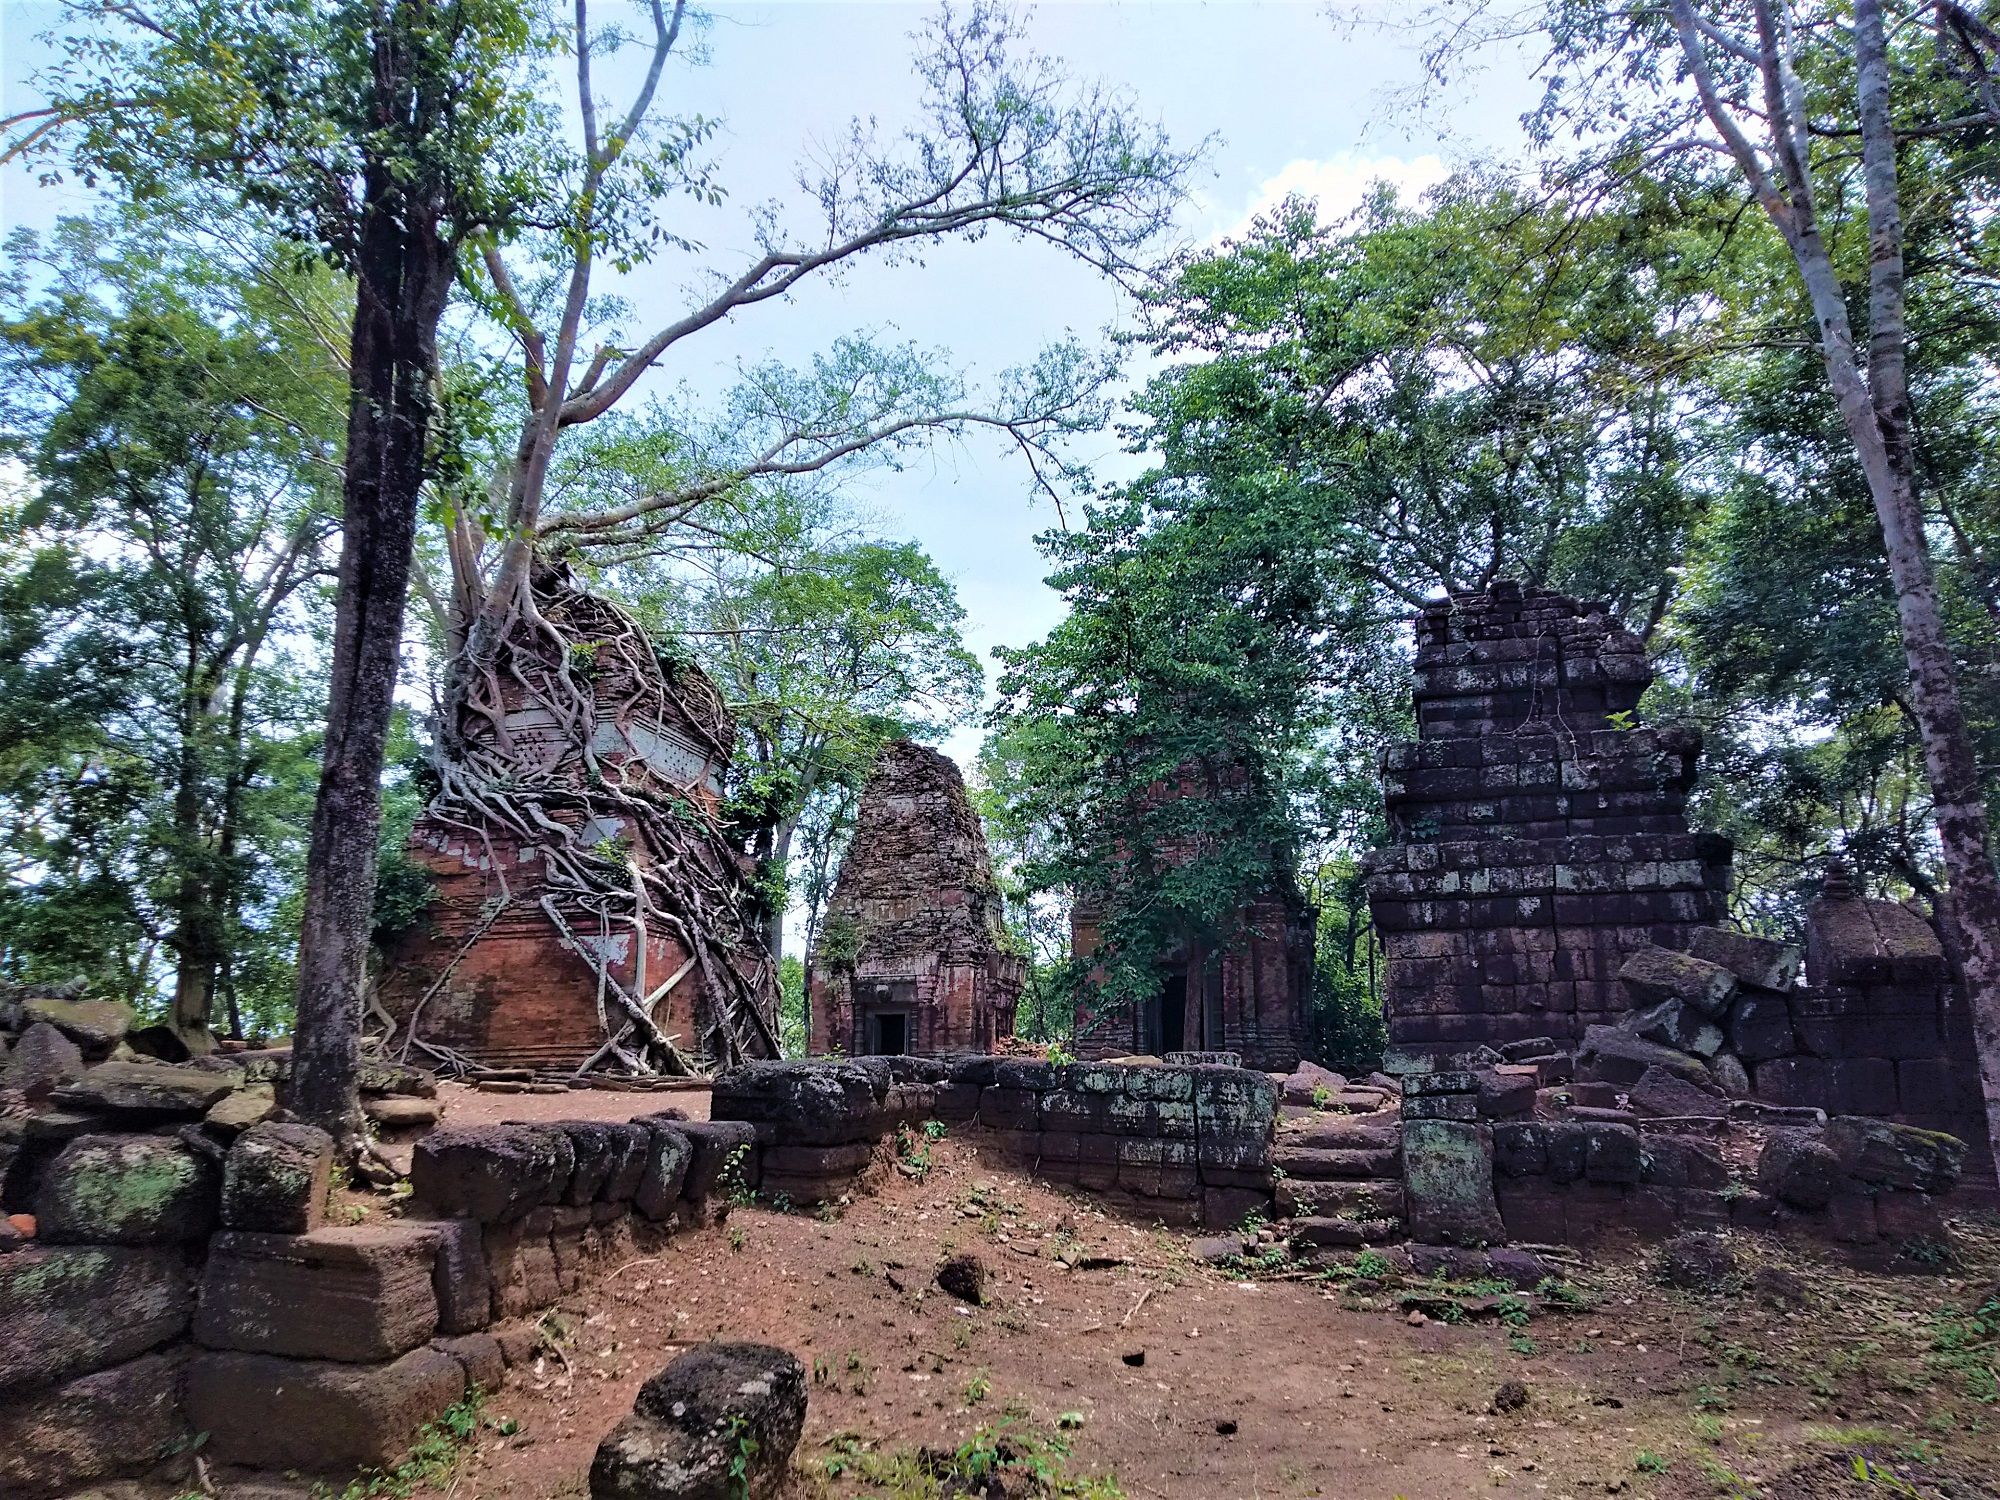 Caption: A photo of the Prasat Pram Temple in Cambodia surrounded by giant trees. (Local Guide @Sophia_20)